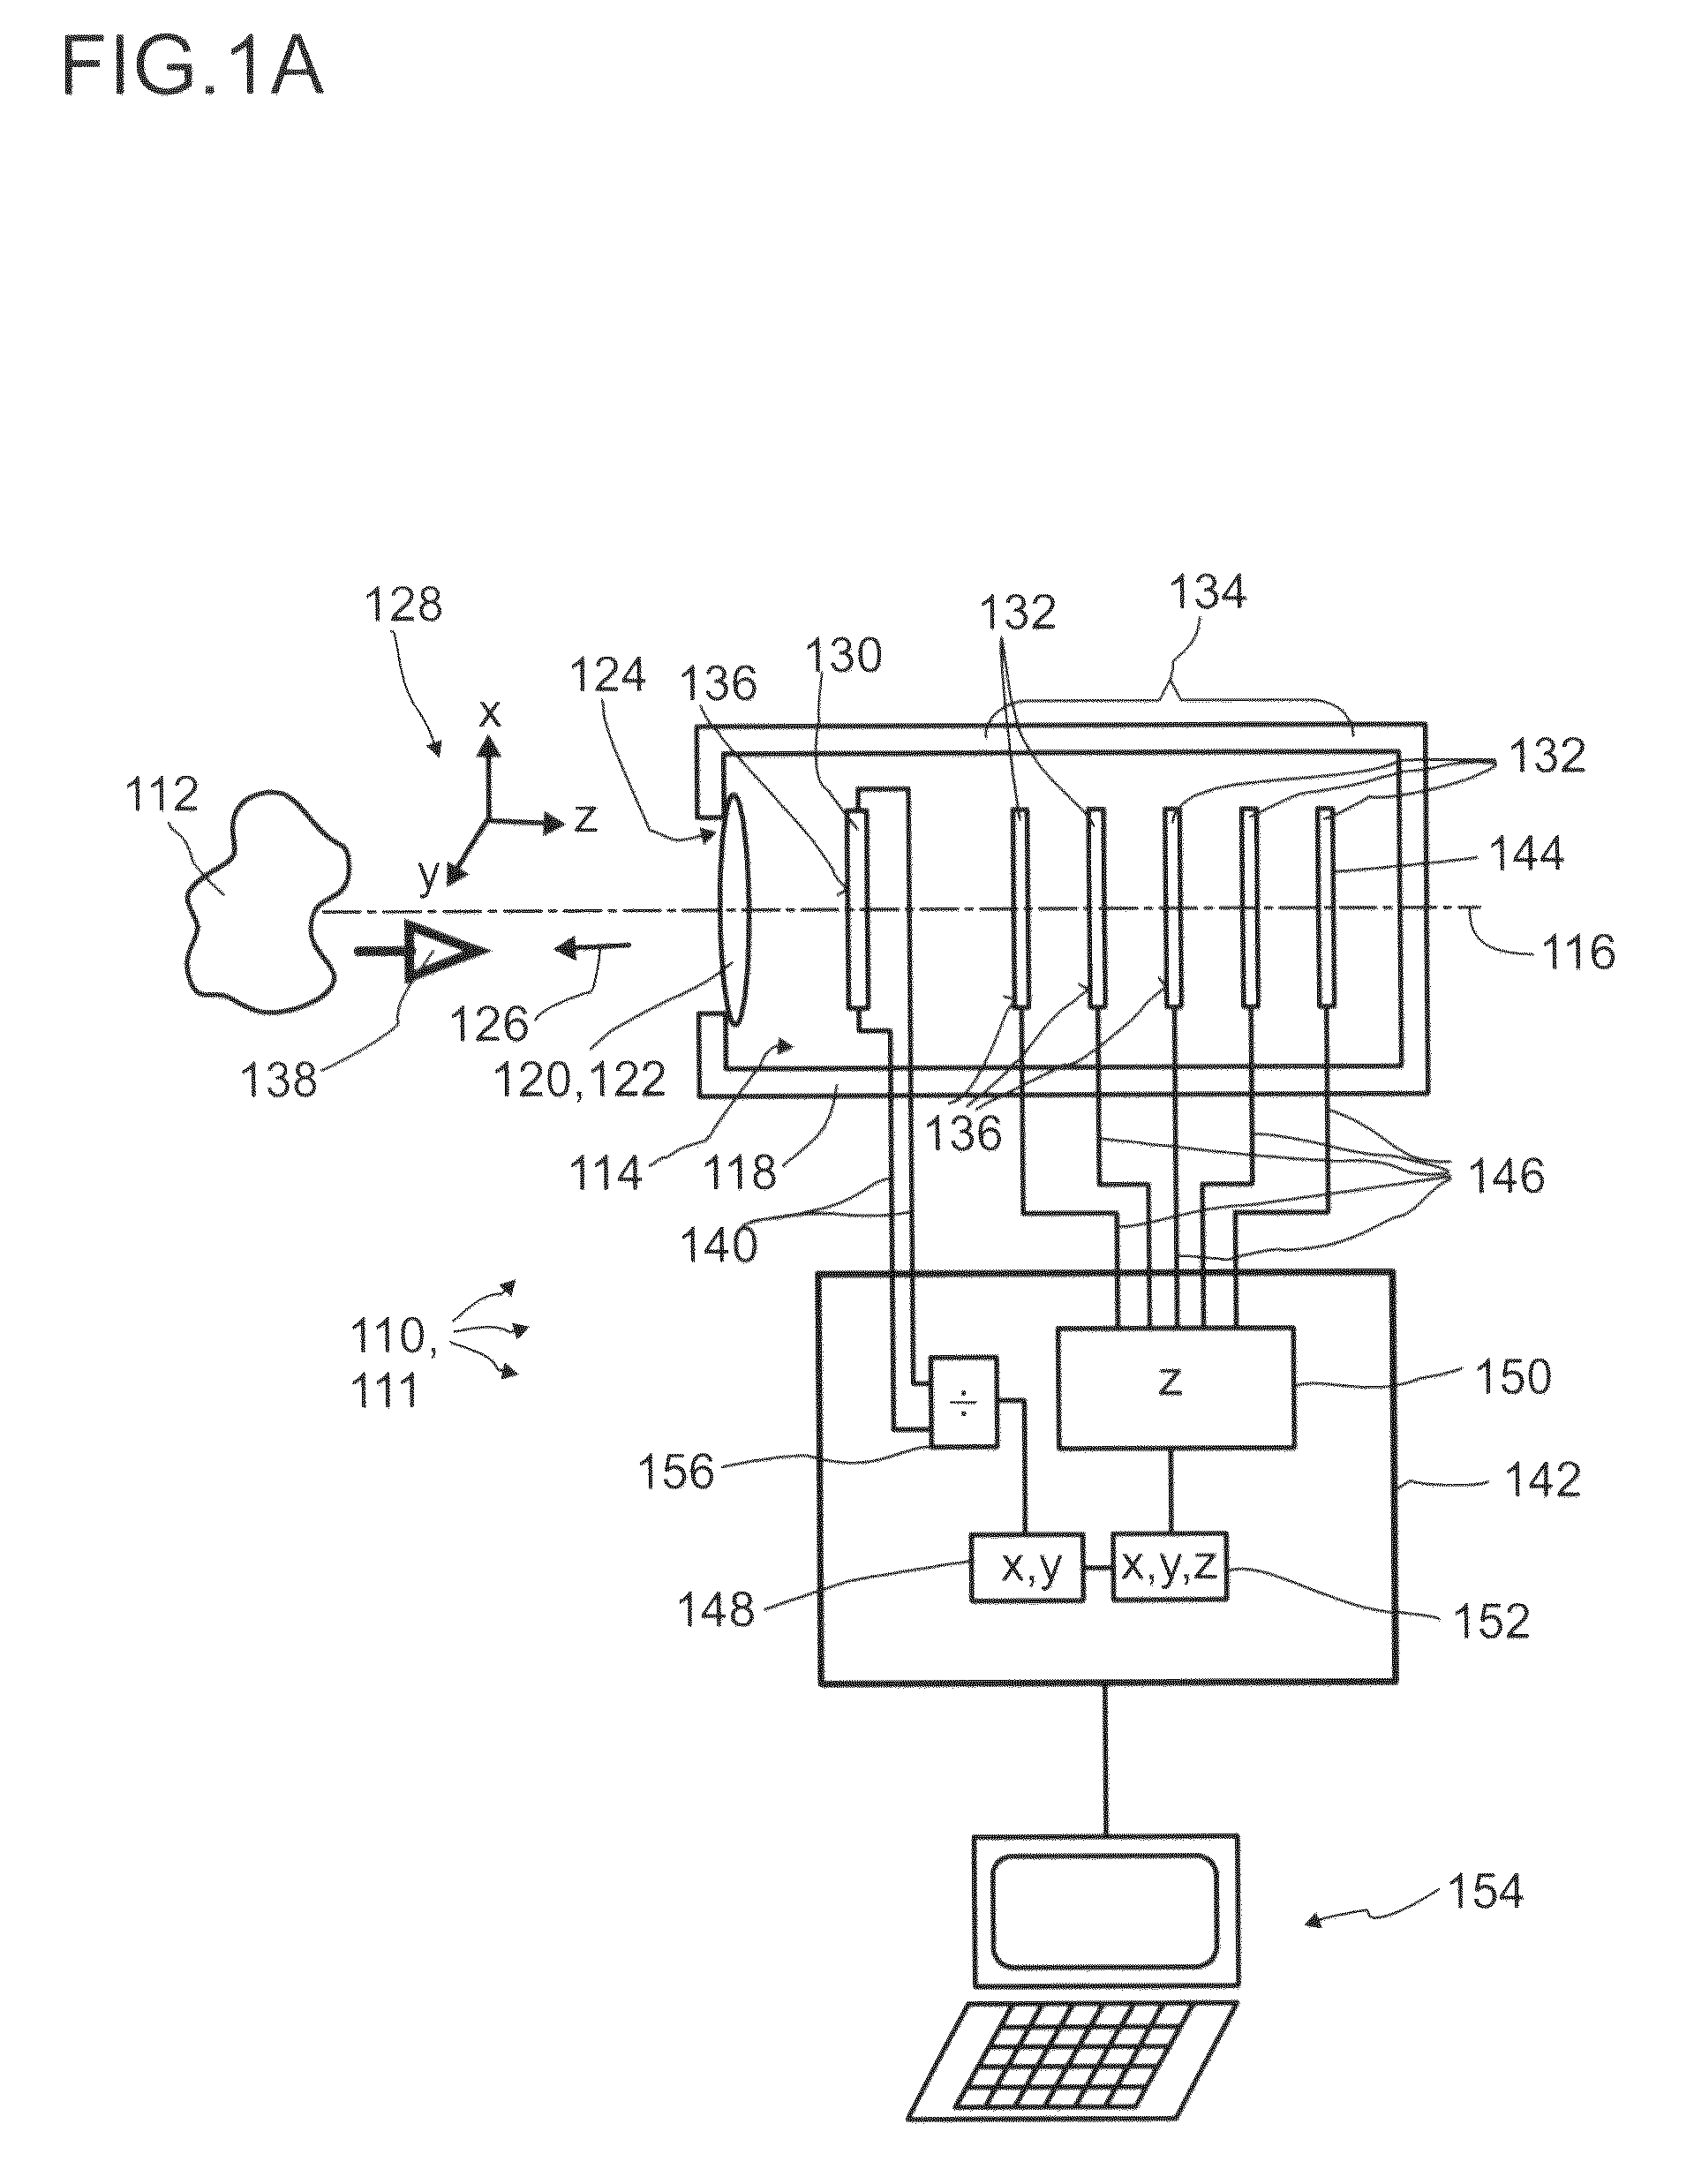 Detector comprising a transversal optical sensor for detecting a transversal position of a light beam from an object and a longitudinal optical sensor sensing a beam cross-section of the light beam in a sensor region